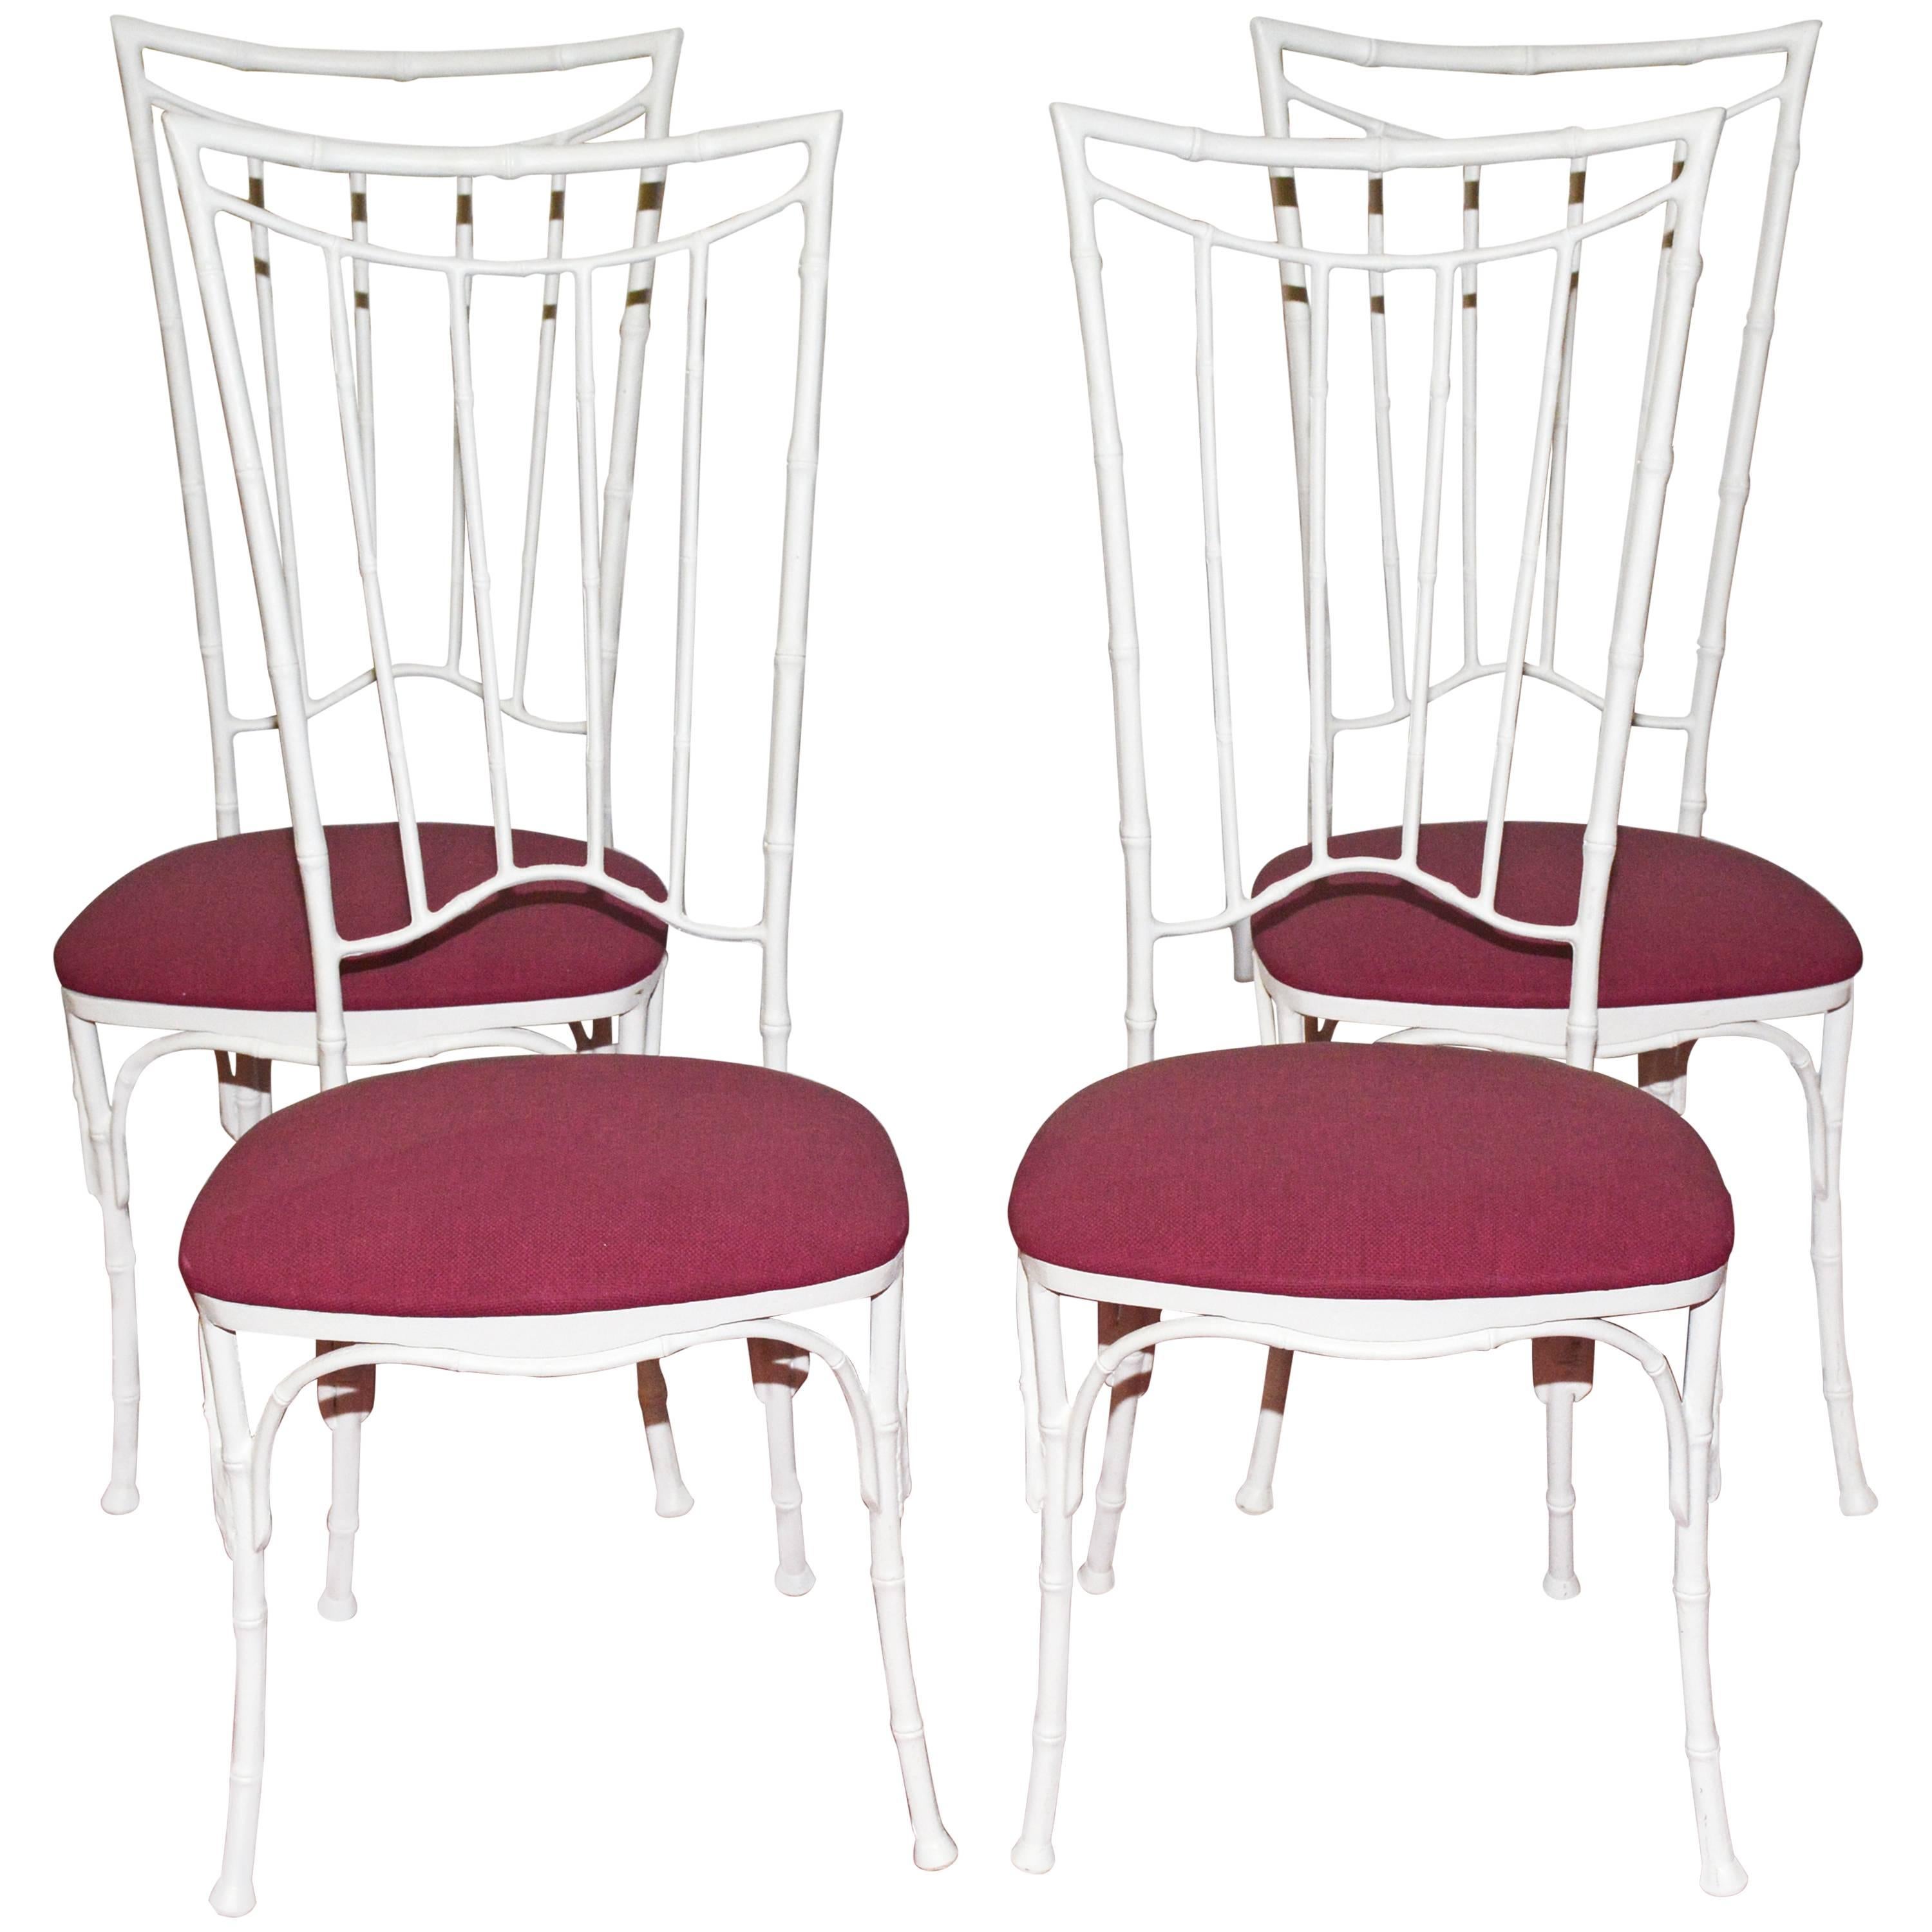 Four Painted Faux Bamboo Wrought Iron Garden Dining Chairs